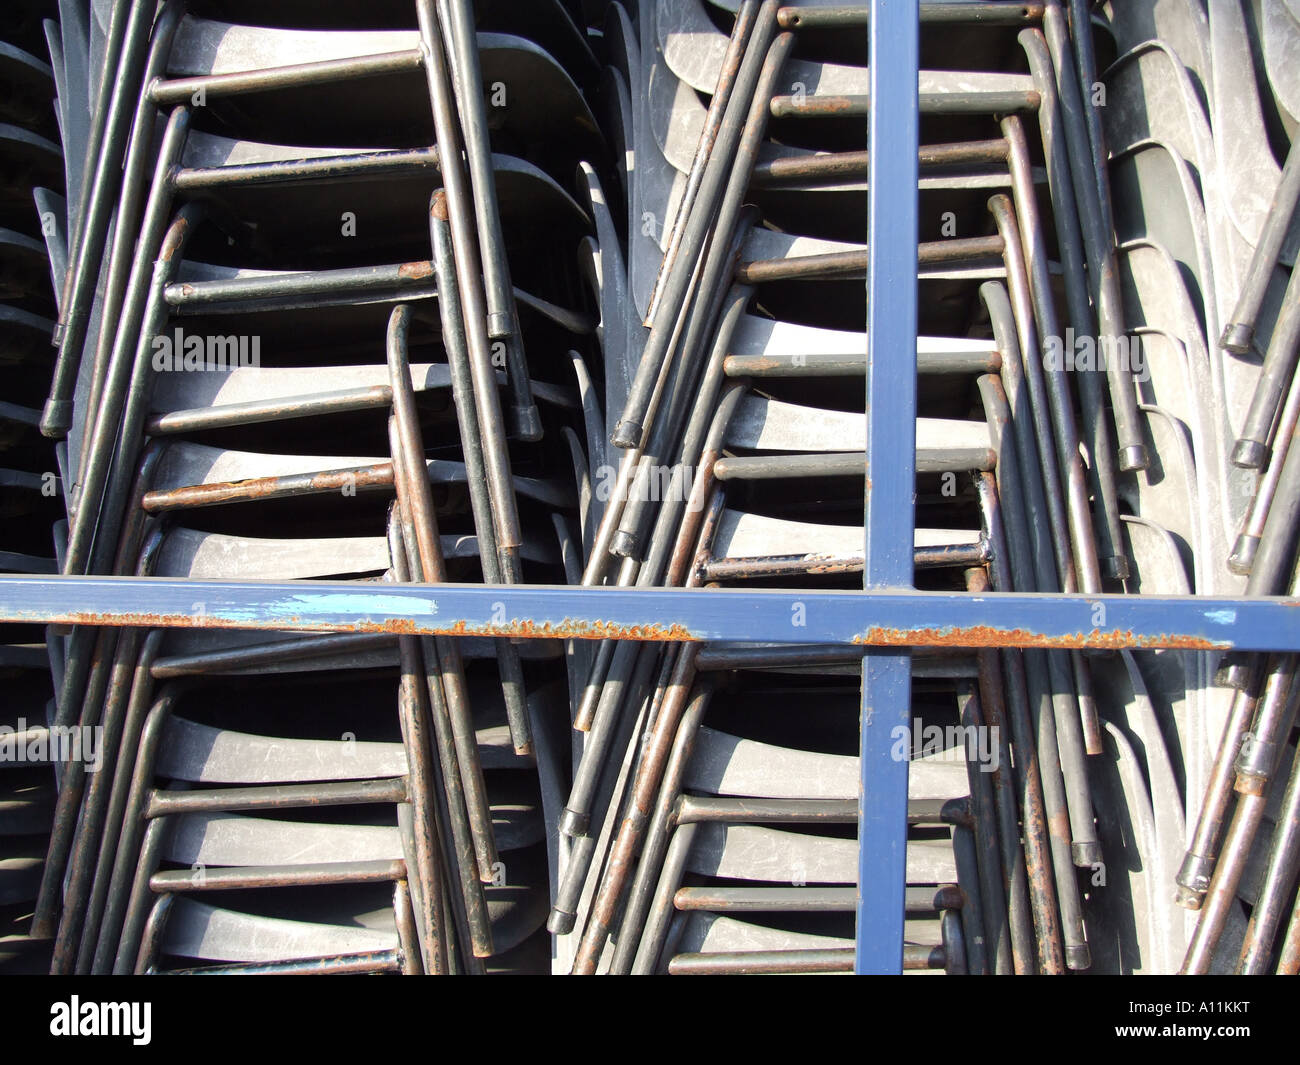 Pile Of Chairs On Truck Lorry Trailer Stock Photo 10113947 Alamy